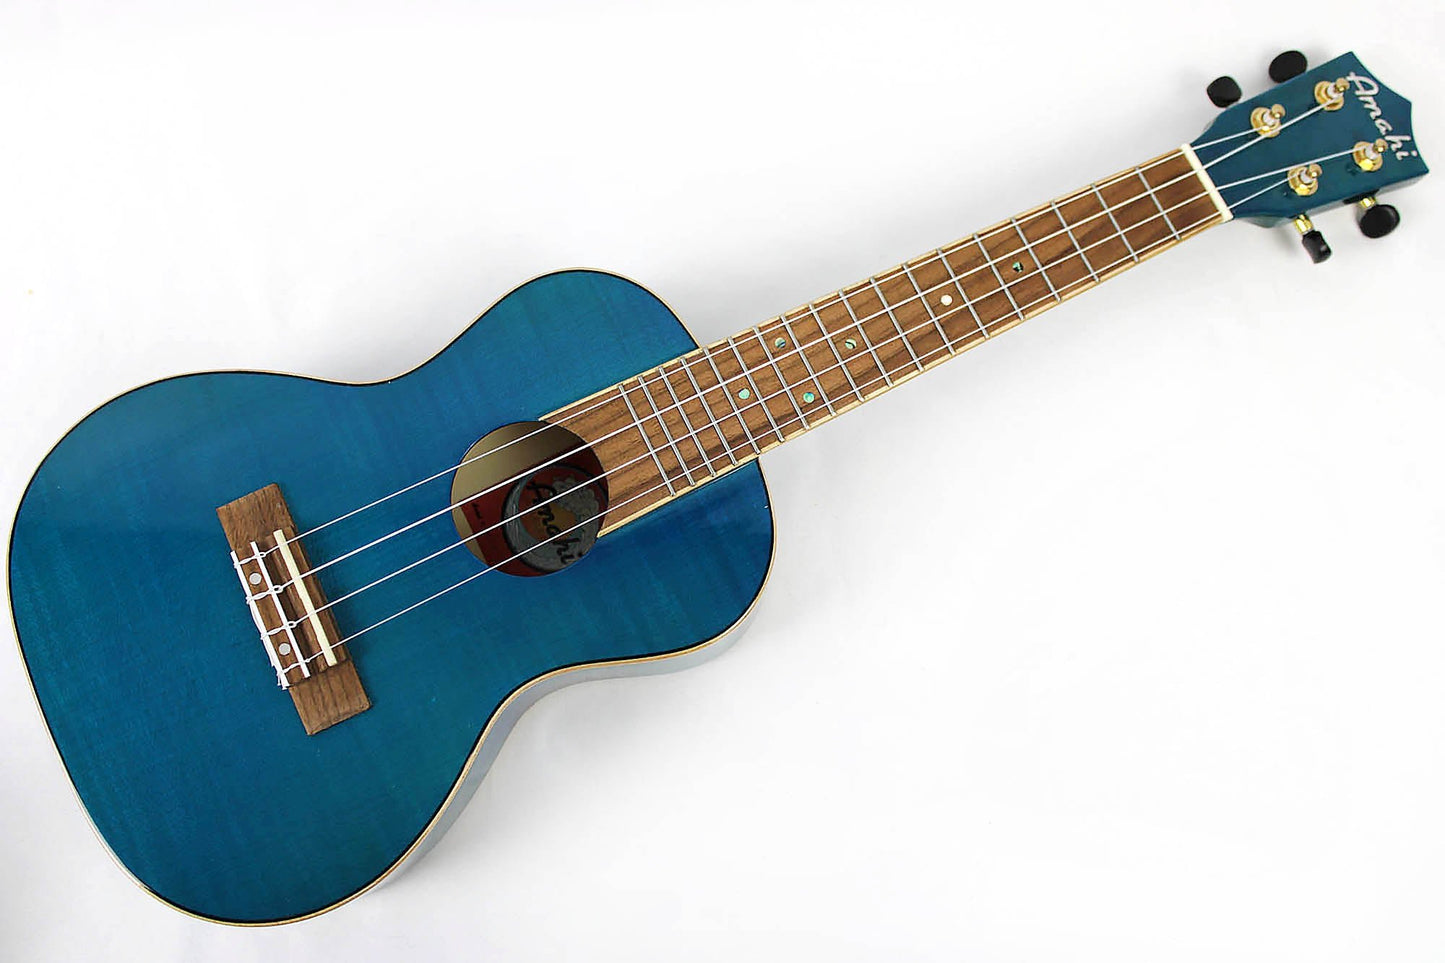 This is the front full view of the top and neck of an Amahi PGUK555BLC Flamed Maple Concert Ukulele- blue.